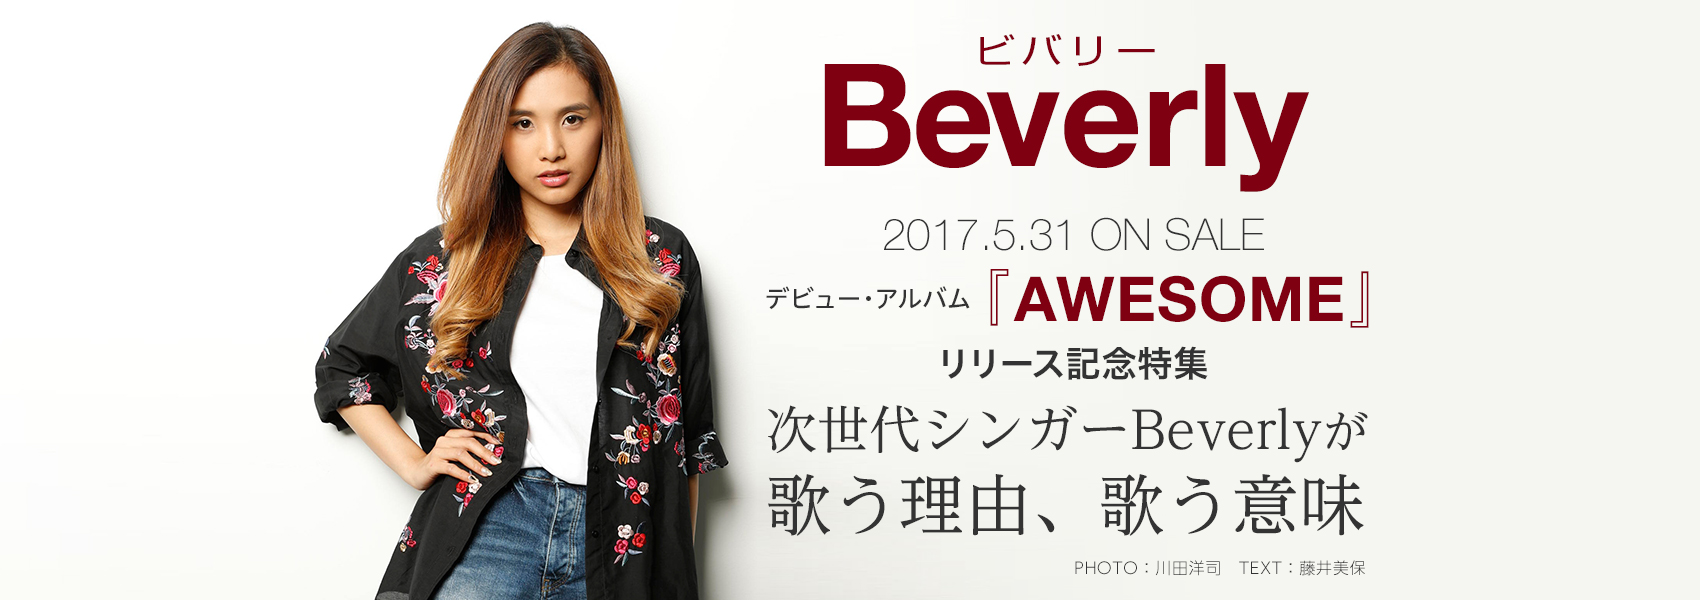 Beverly 2017.5.31 ON SALE デビュー・アルバム『AWESOME』リリース記念特集